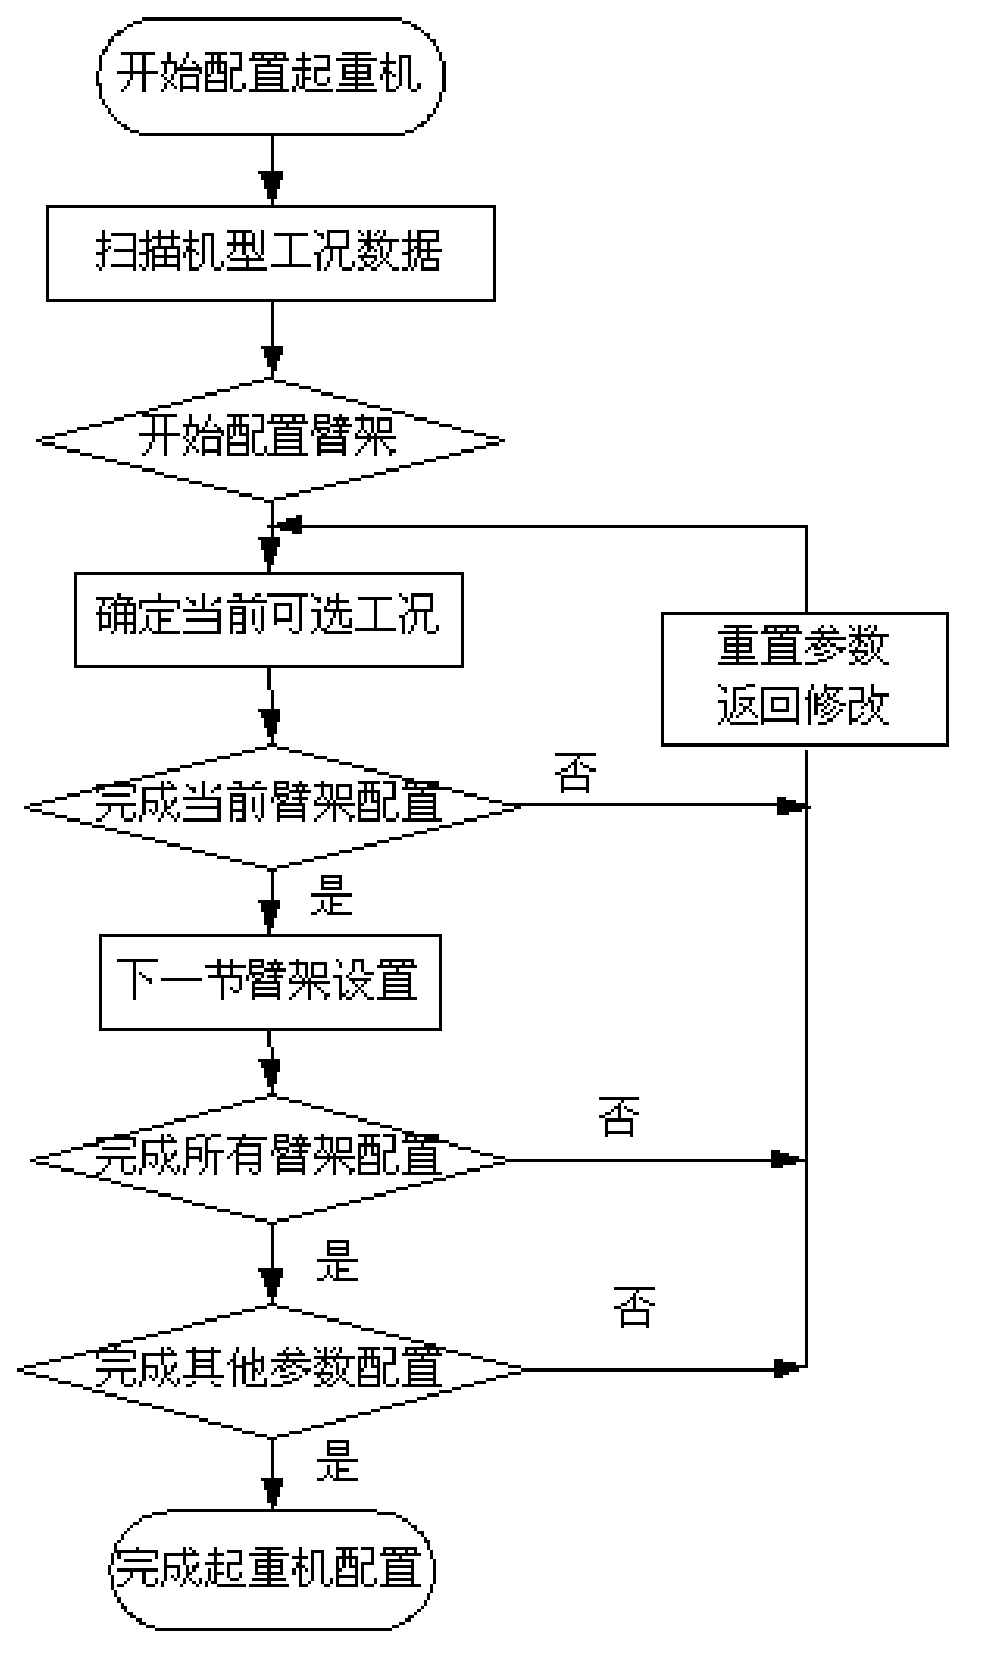 Method for allocating load to double cranes cooperatively operating